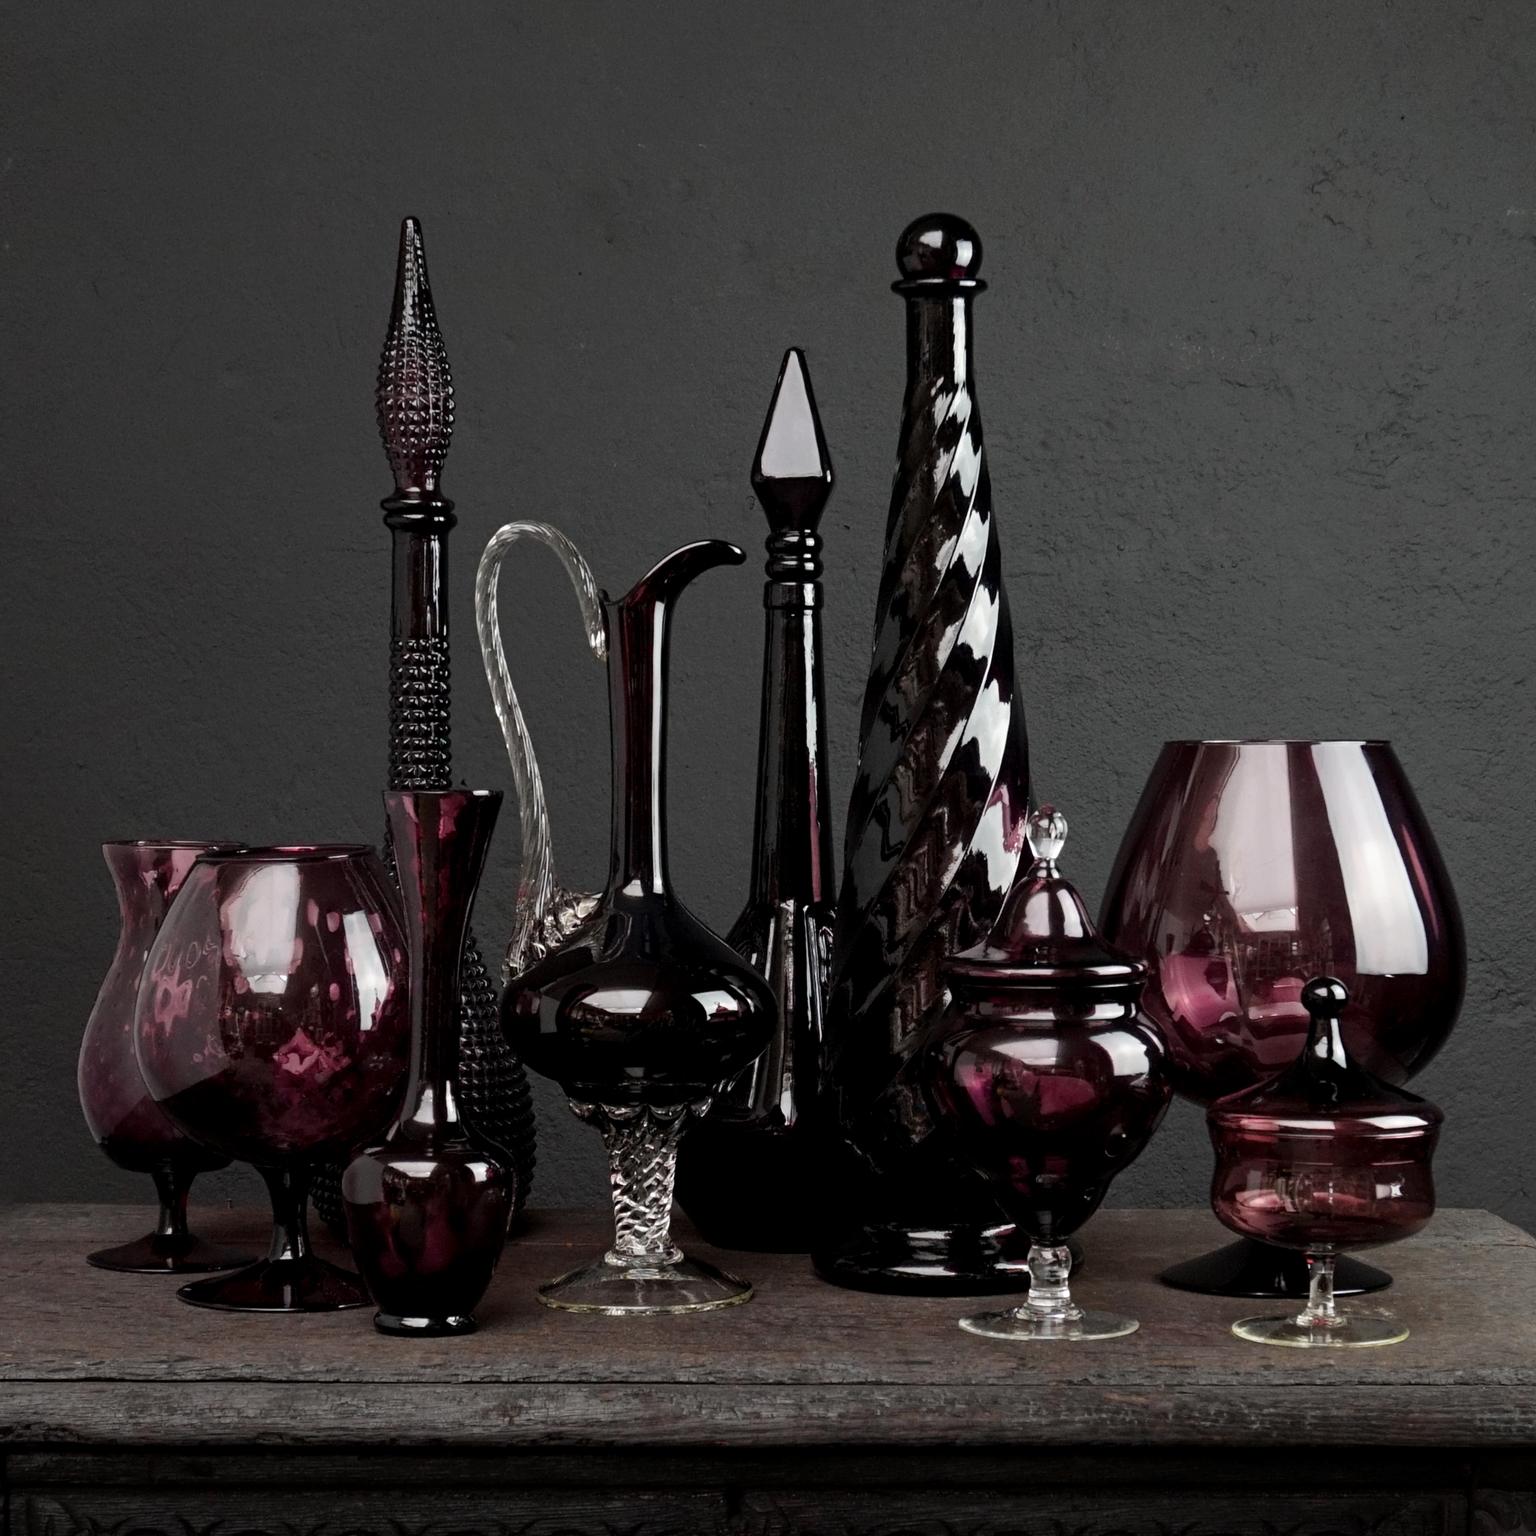 Very decorative aubergine, amethist, plum coloured purple set of ten different size and colour Italian art glass bottles, vases and apothecary or candy jars.

Mention Italian glass and probably everyone’s mind immediately leaps to Venice and